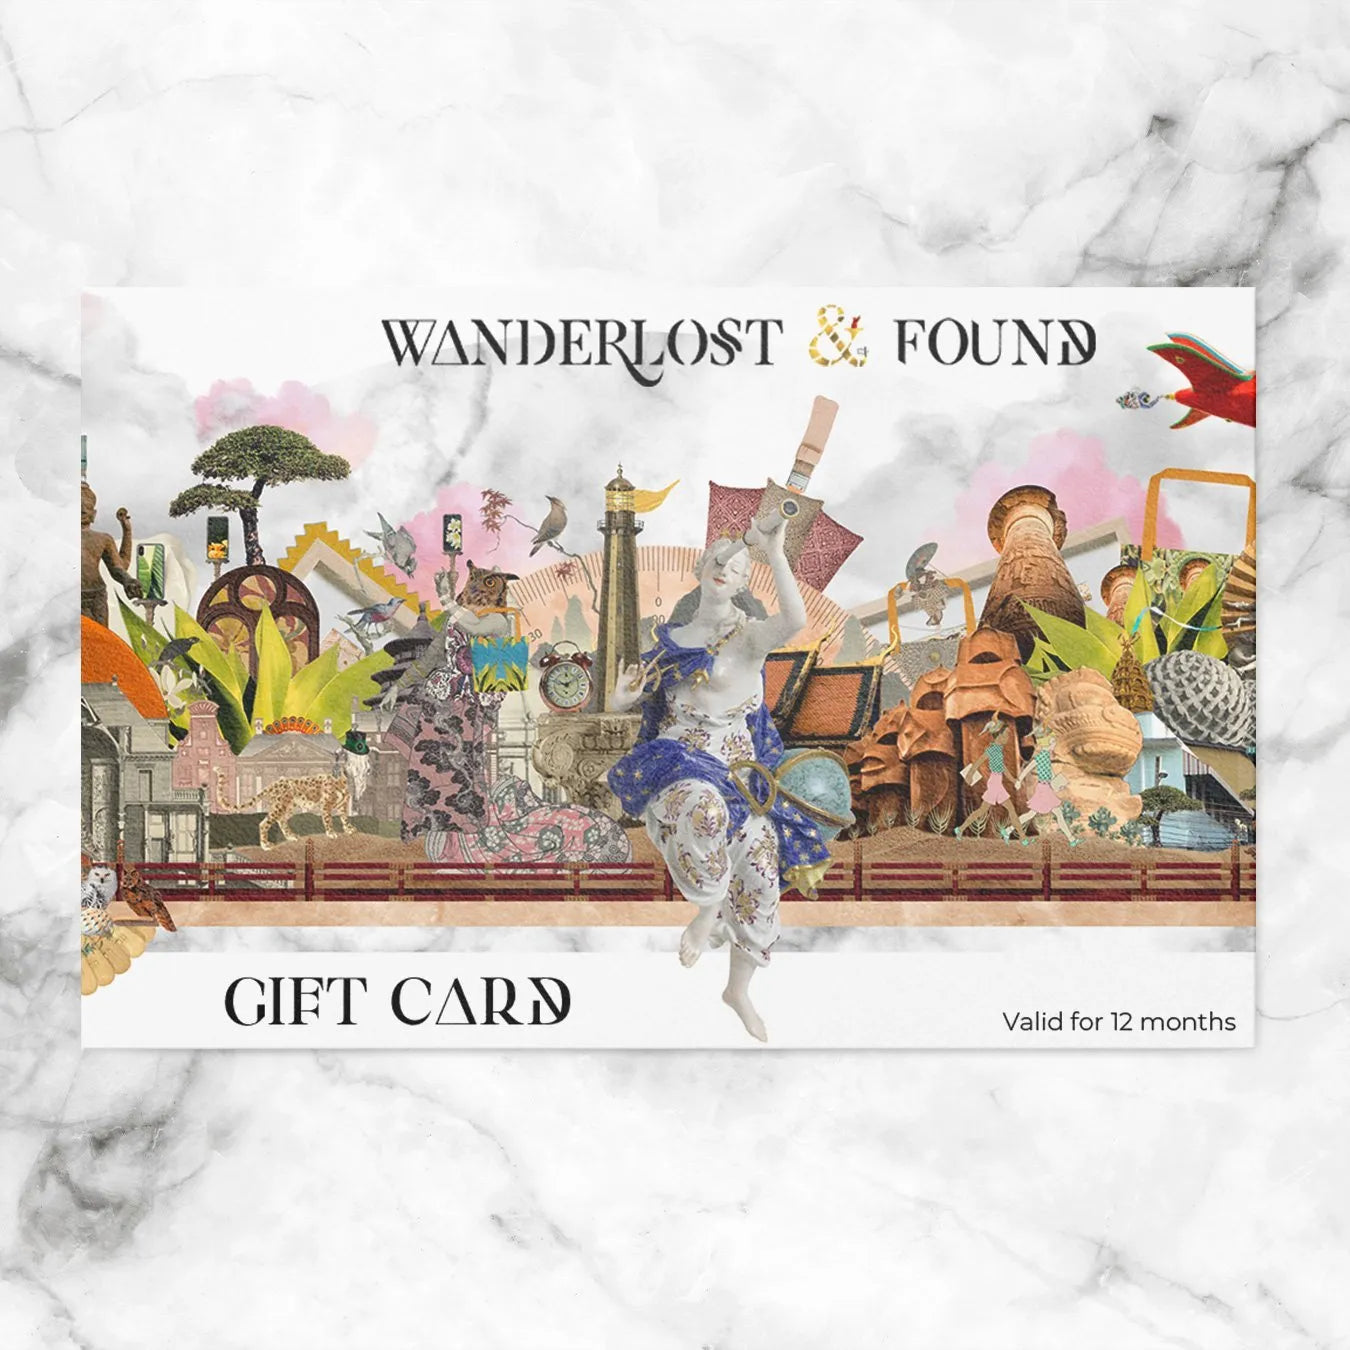 Wanderlost Gift Card - Usd 10.00 - Gift Cards - Aesthetic Art